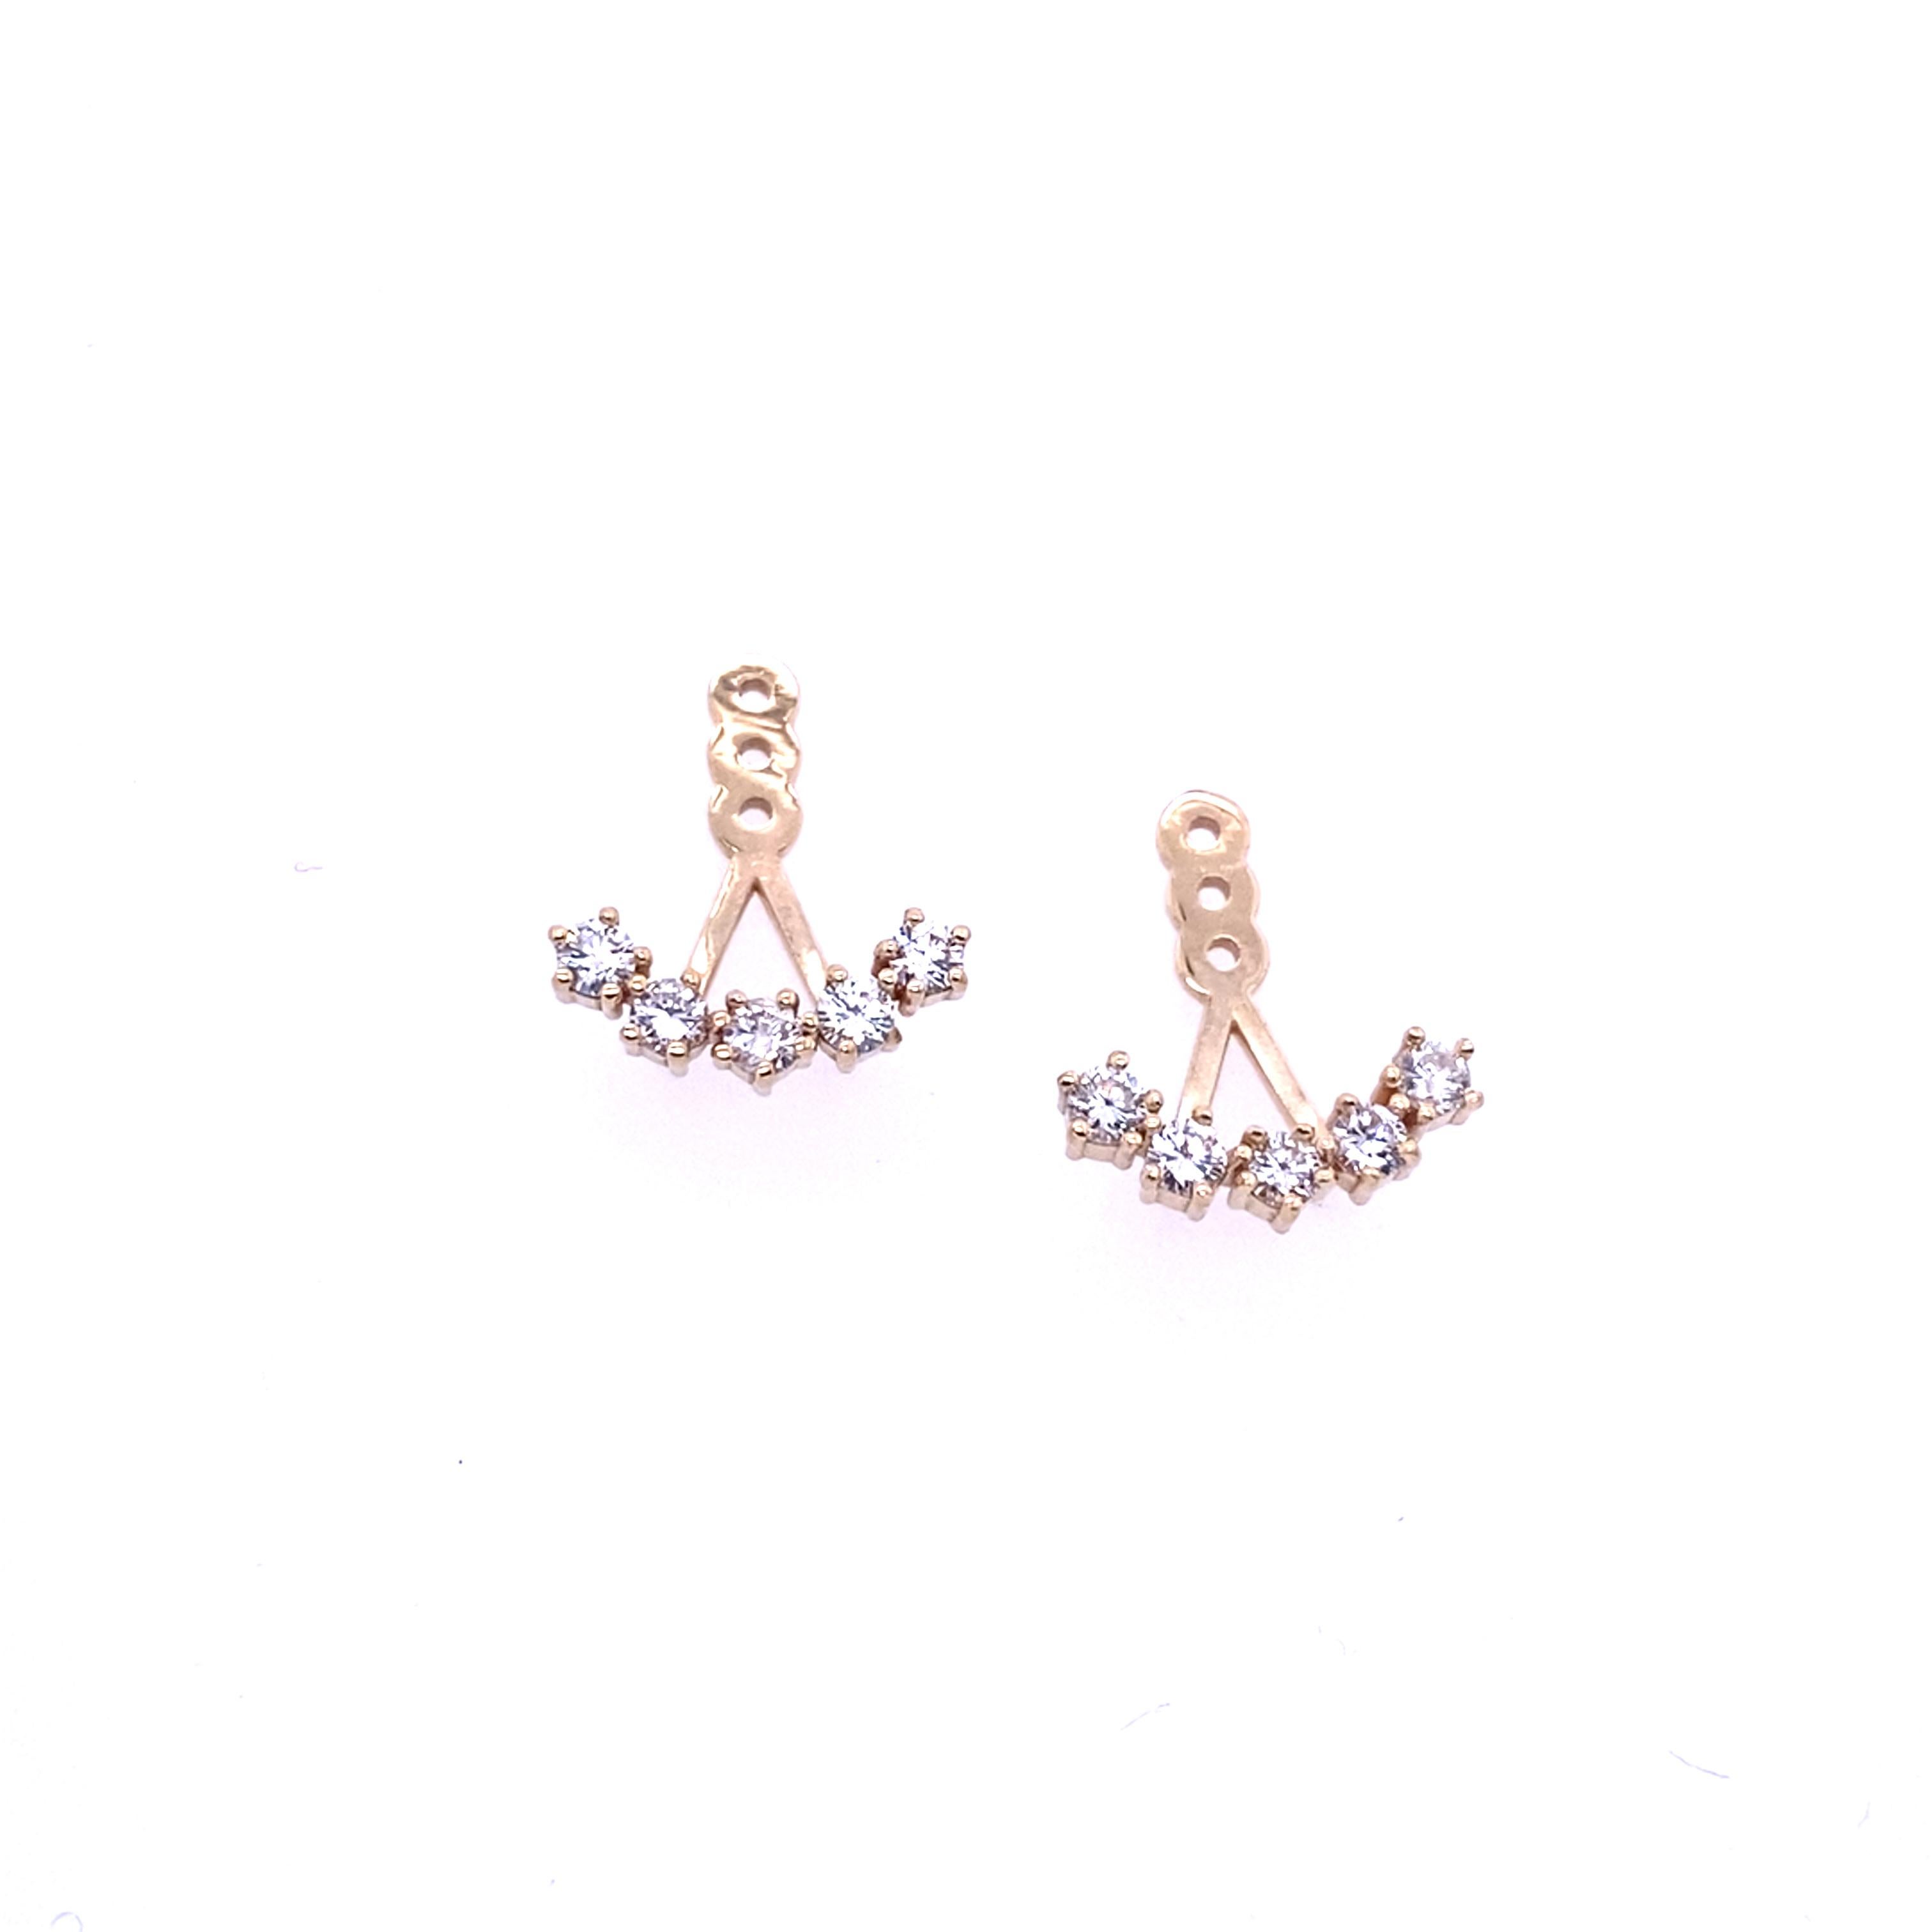 This earring jackets fit behind any stud earring, are set with 5 round brilliant cut diamonds in each earring, with total diamond weight 0.40ct. Set in 14ct yellow gold. The earrings are stylish and perfect for everyday wear.
Total Diamond Weight: